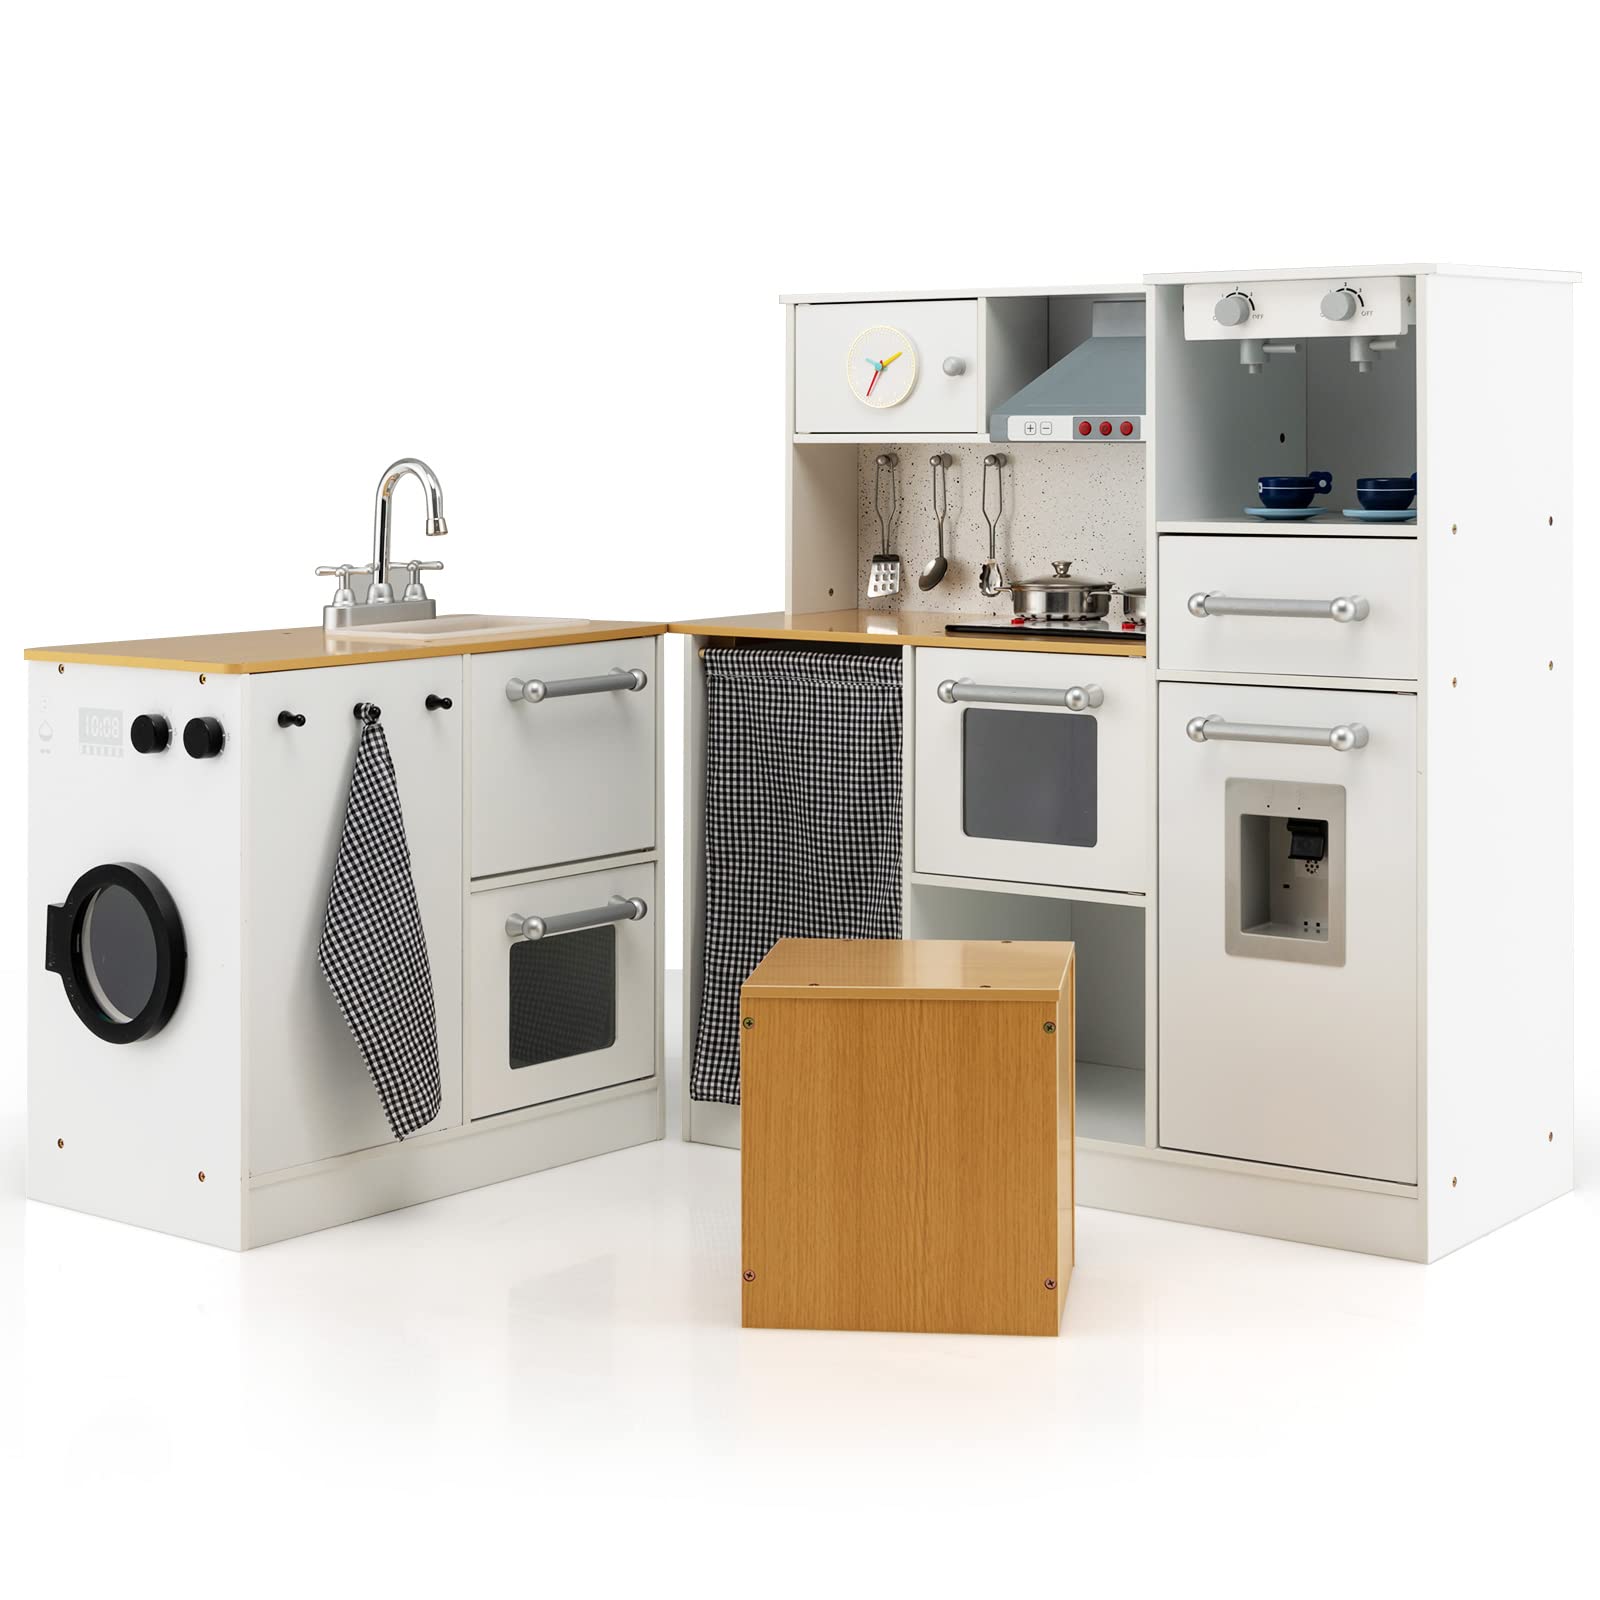 Red Wooden Toy Kitchen with Fridge Freezer and Oven by Teamson